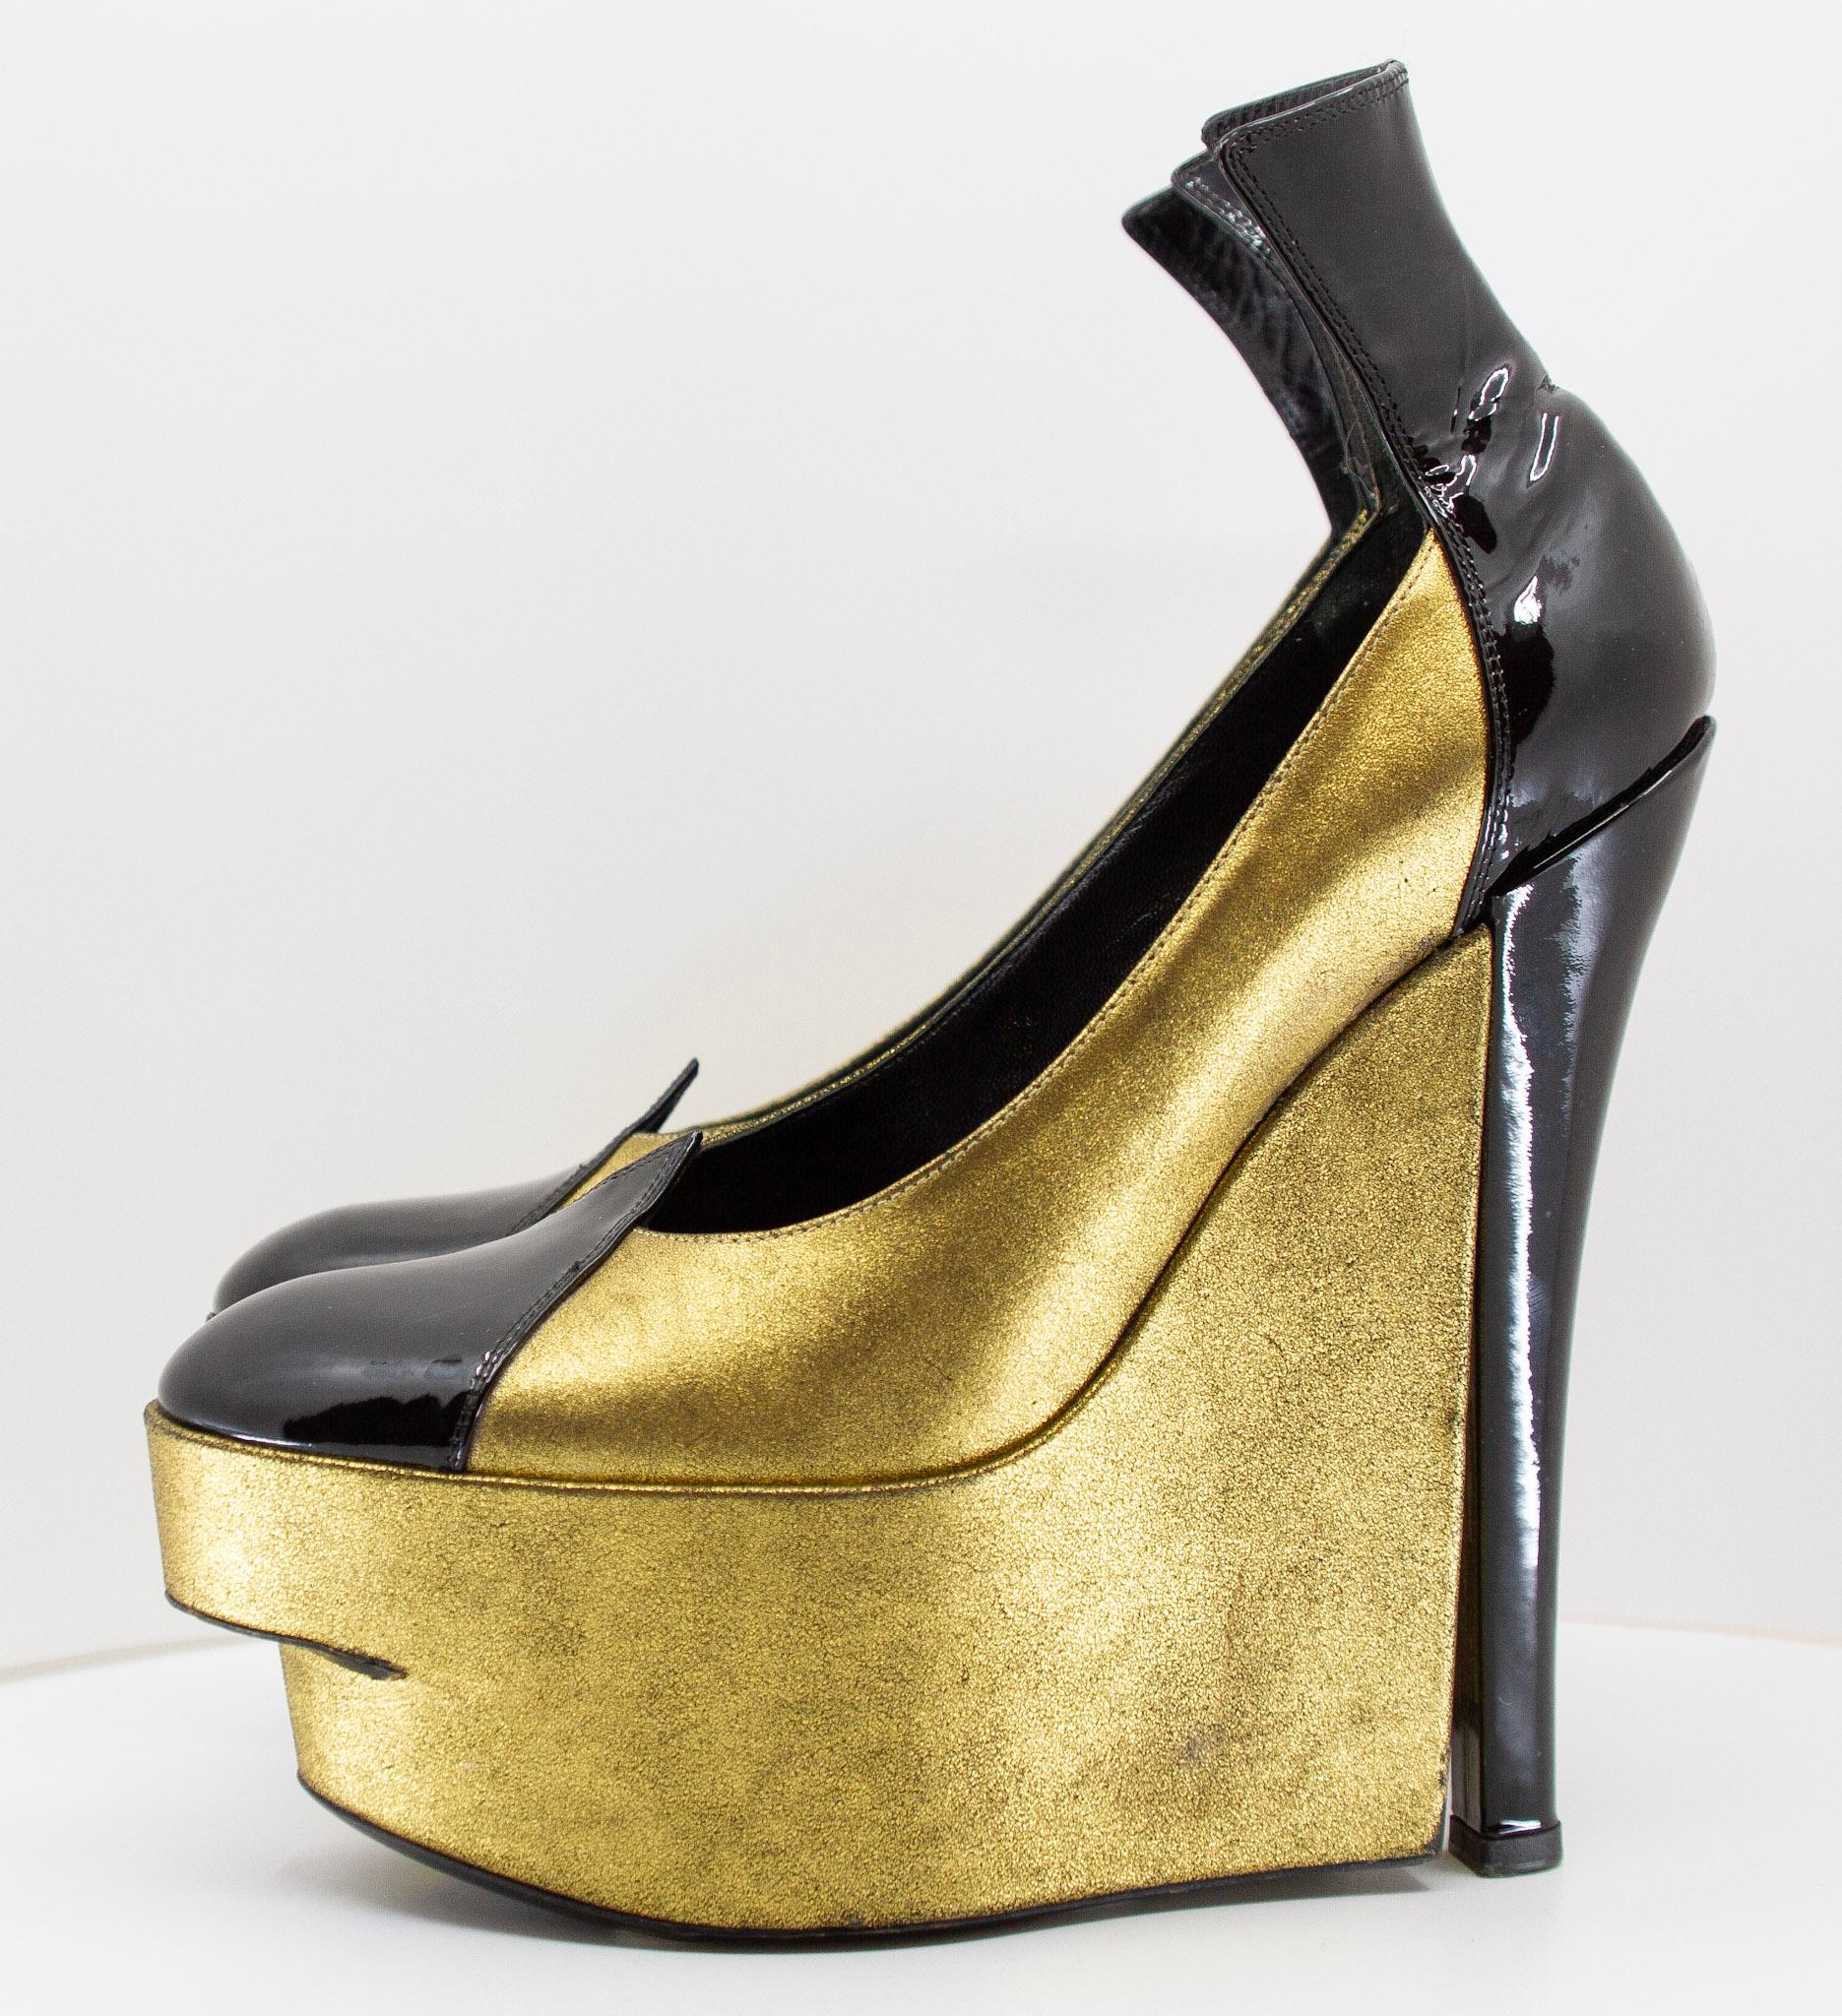 Louis Vuitton Runway Fall 2008 Metallic Gold/Black Patent Wedged Heels In Excellent Condition For Sale In Kingston, NY